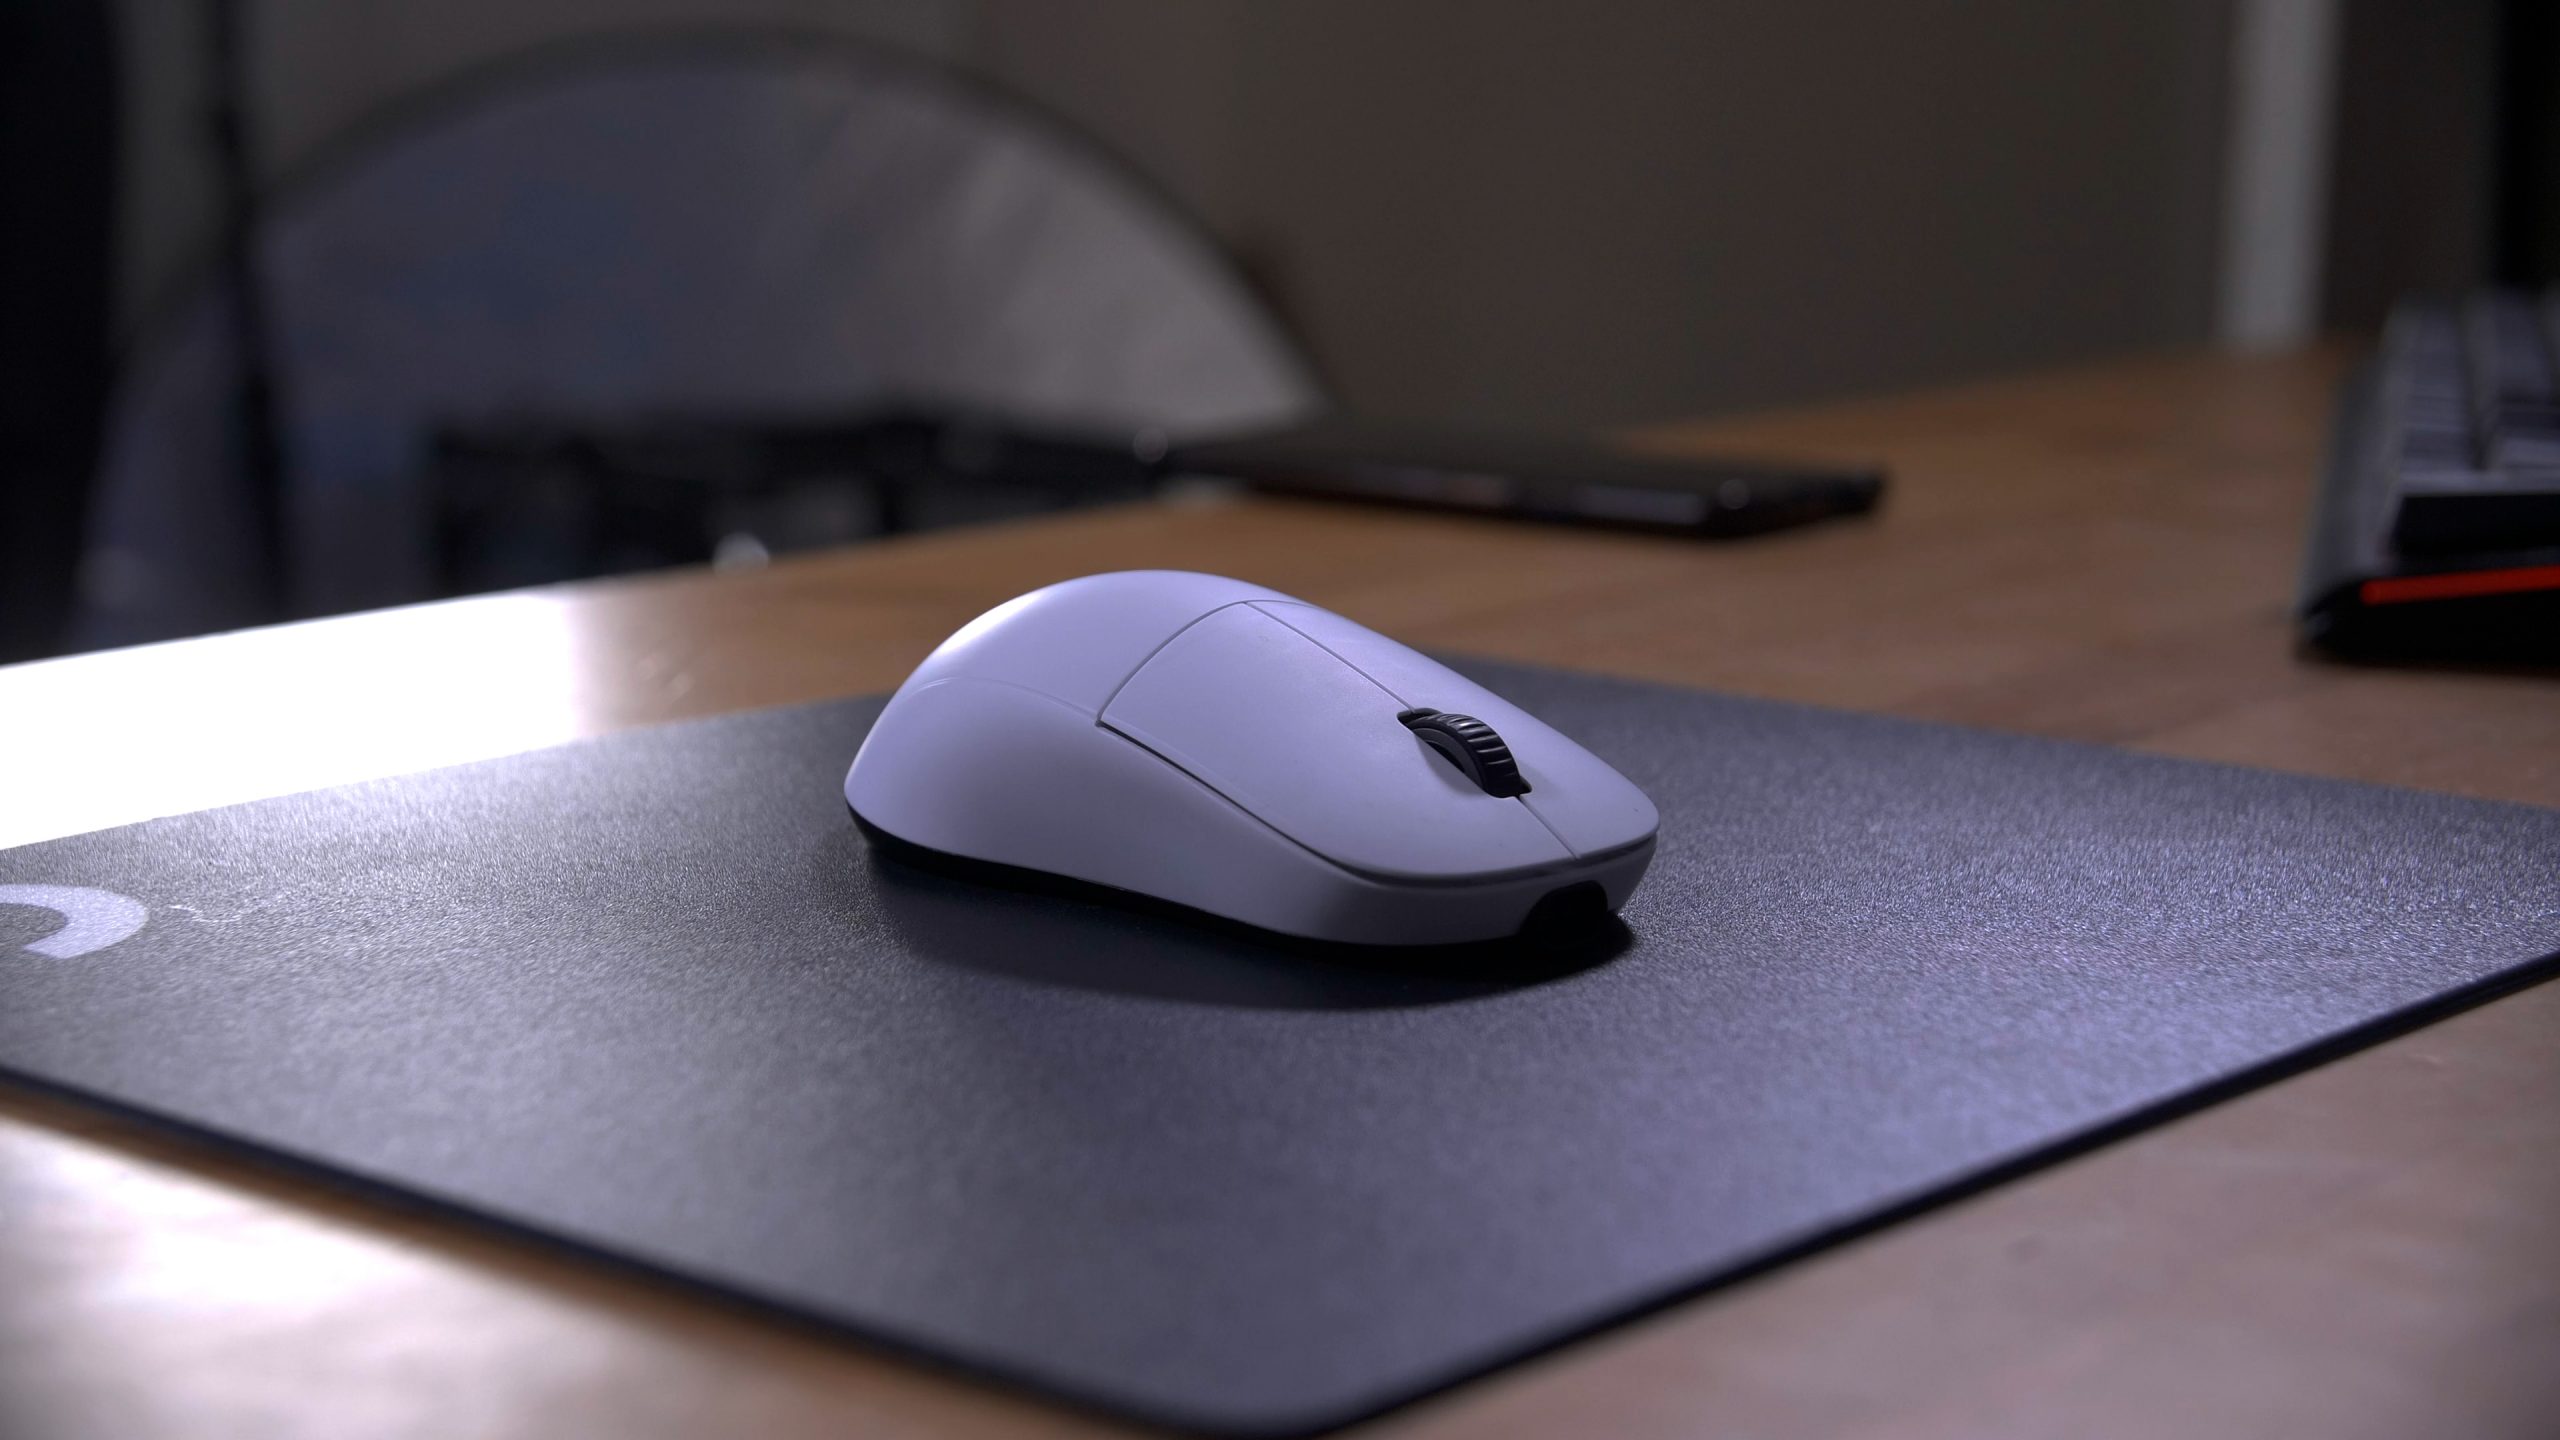 Endgame Gear XM2we wireless gaming mouse review